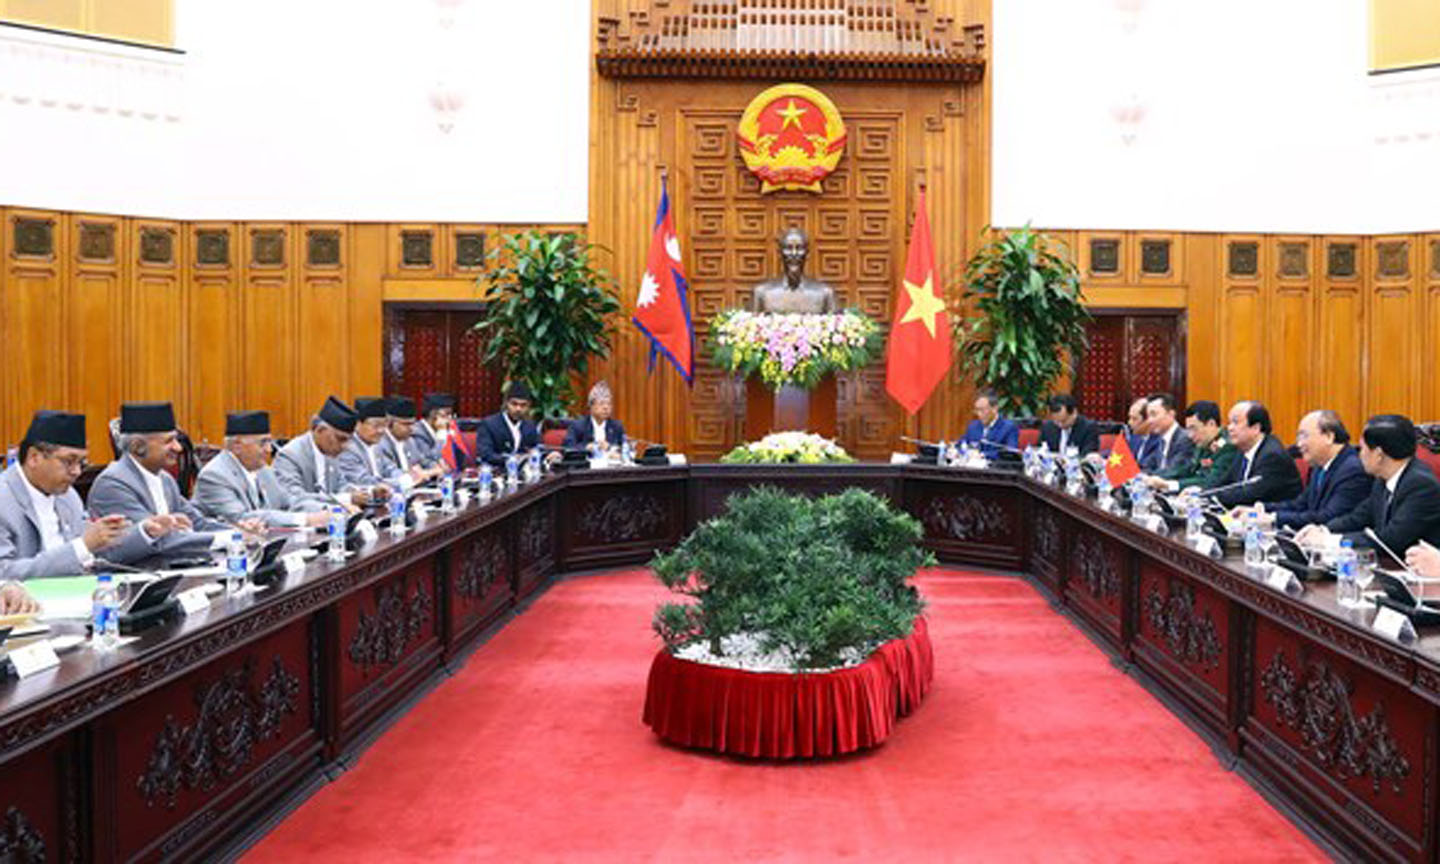 At the talks between Prime Minister Nguyen Xuan Phuc and his Nepalese counterpart K P Sharma Oli (Source: VNA)